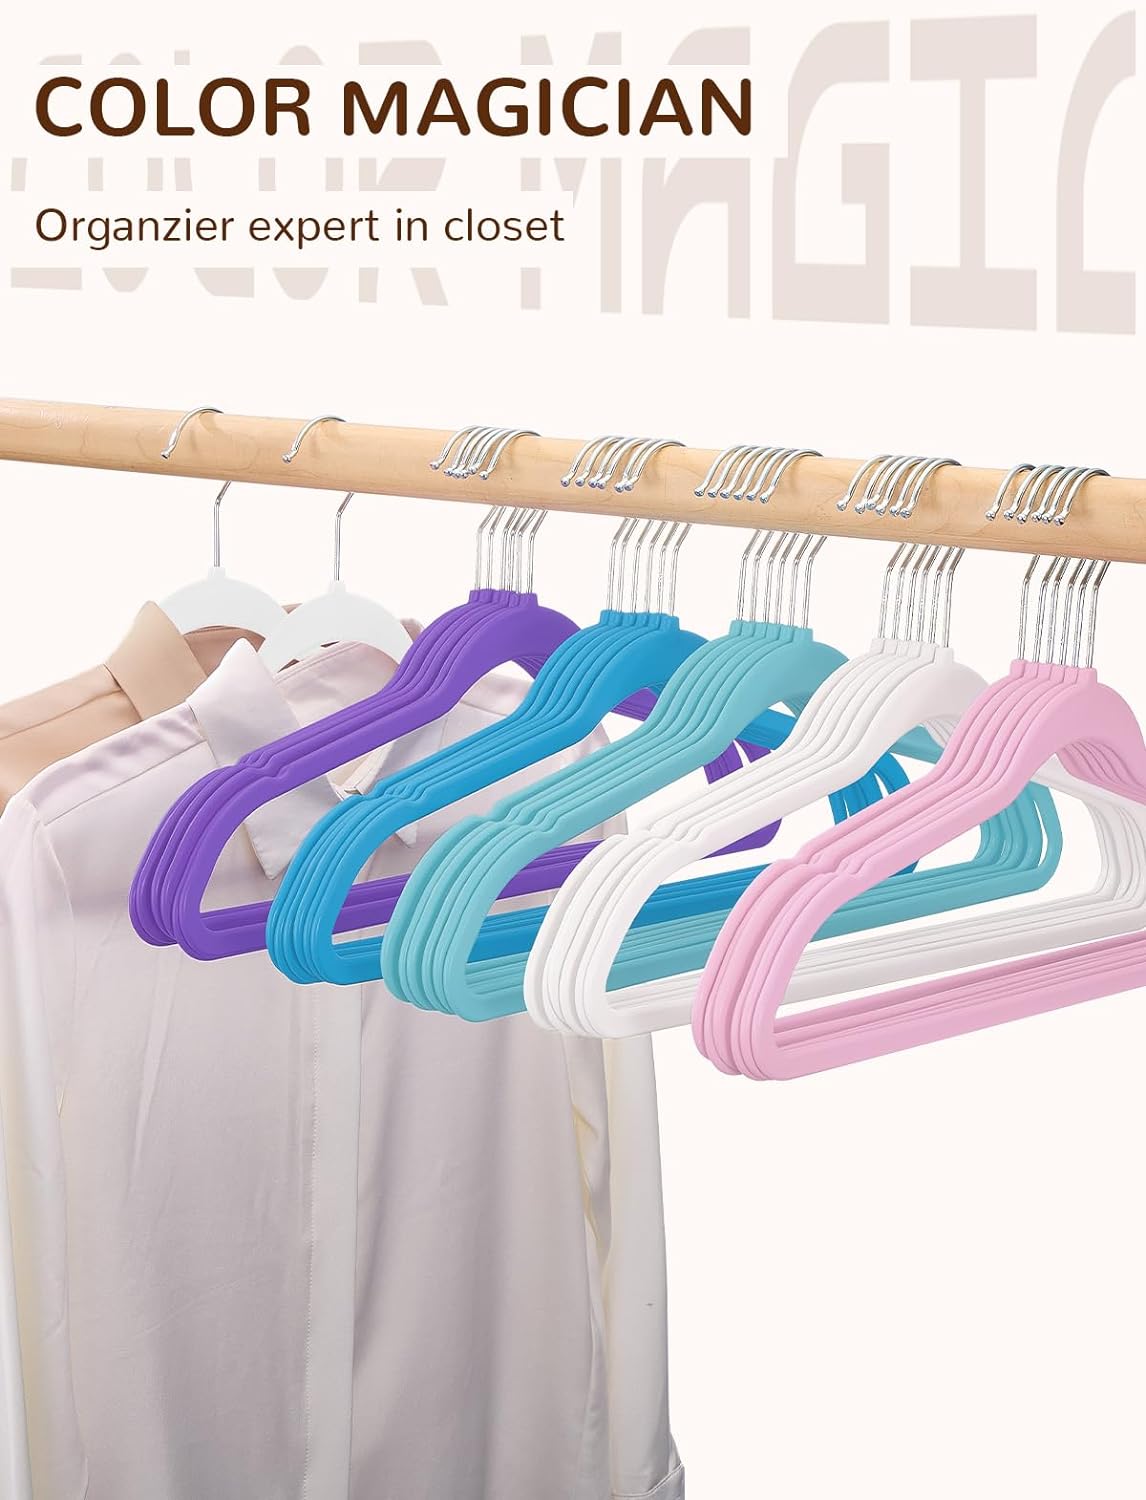 HOUSE DAY 17.5 Inch Plastic Hangers White 20 Pack